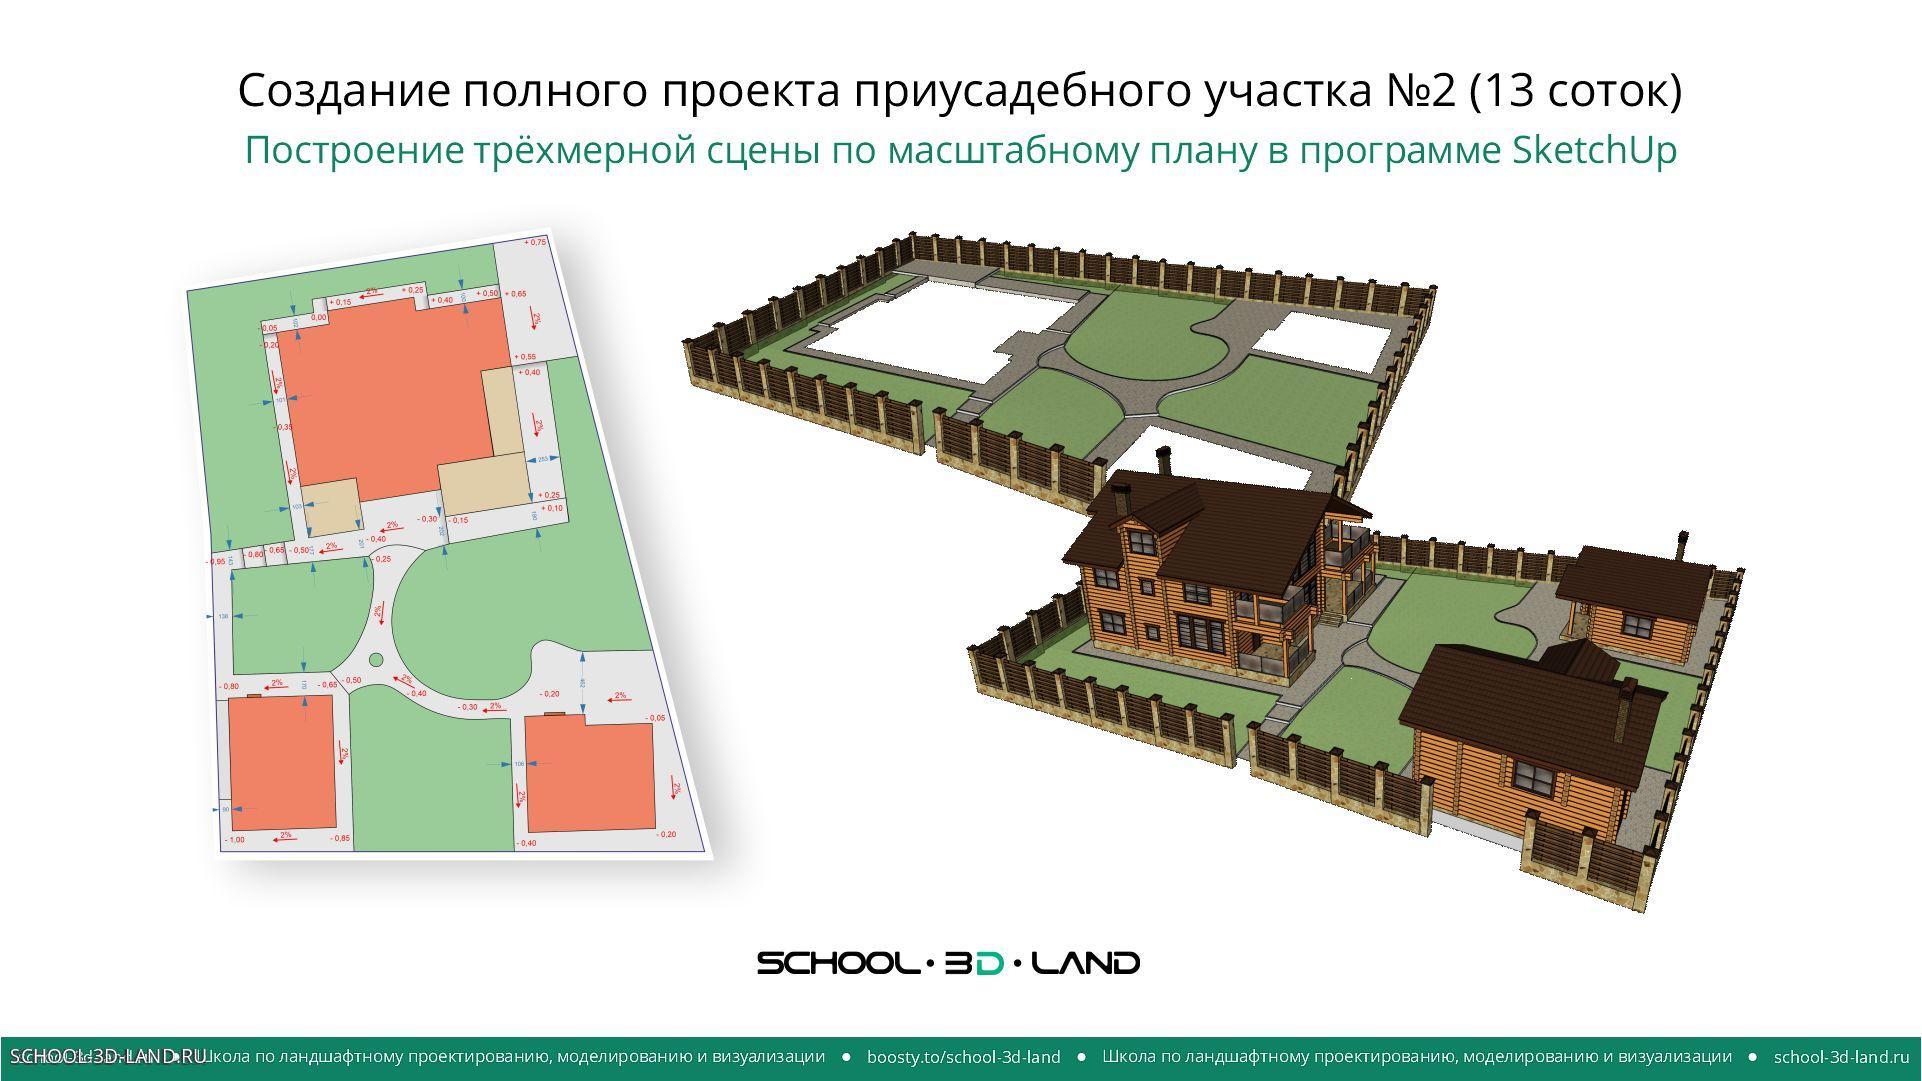 Project No. 2. 3D modeling of the site according to ready-made plans. Parts 1-2